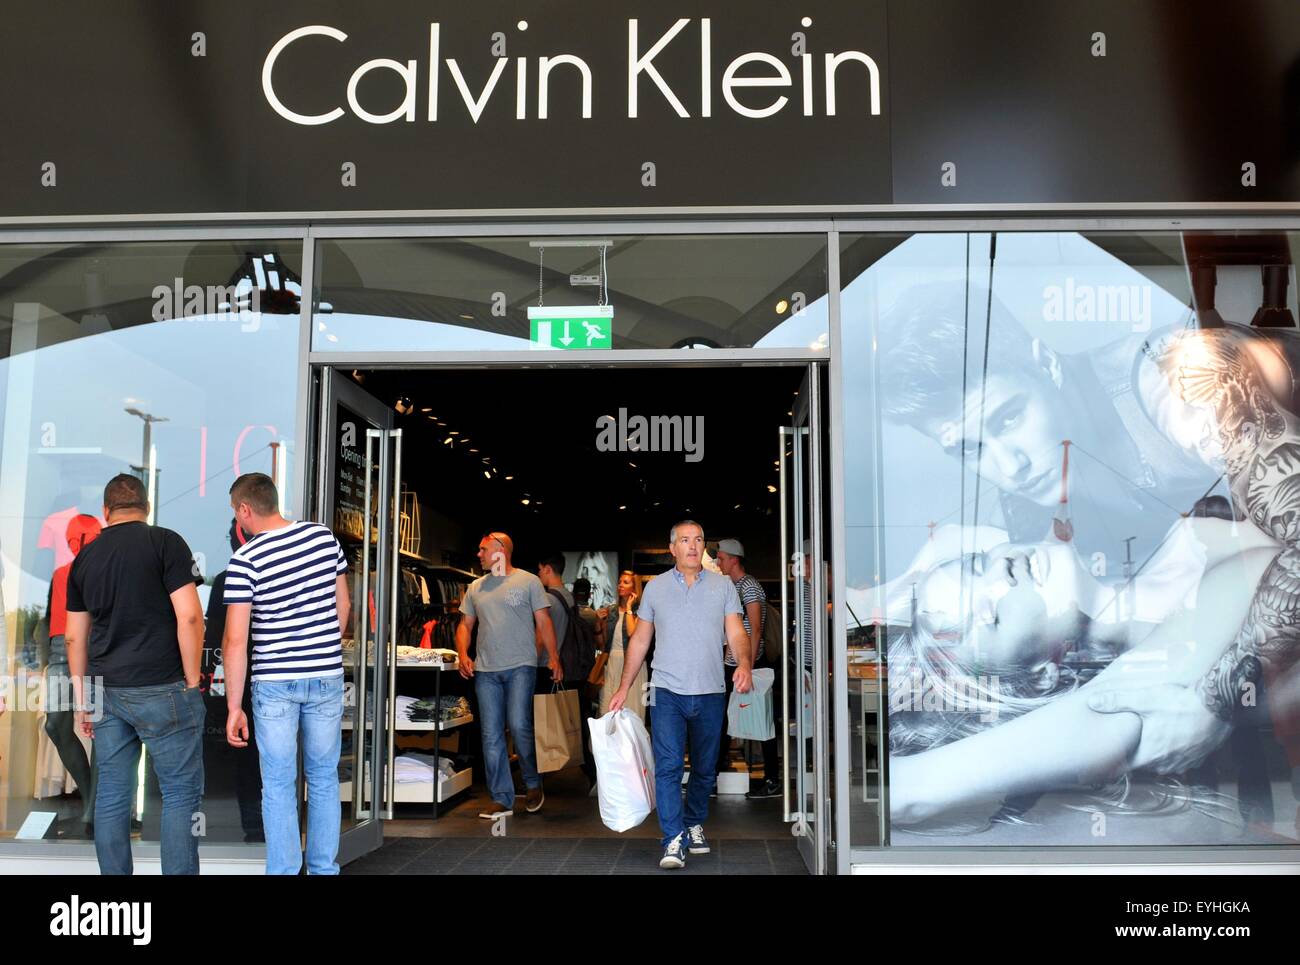 Calvin Klein Perfume High Resolution Stock Photography and Images - Alamy